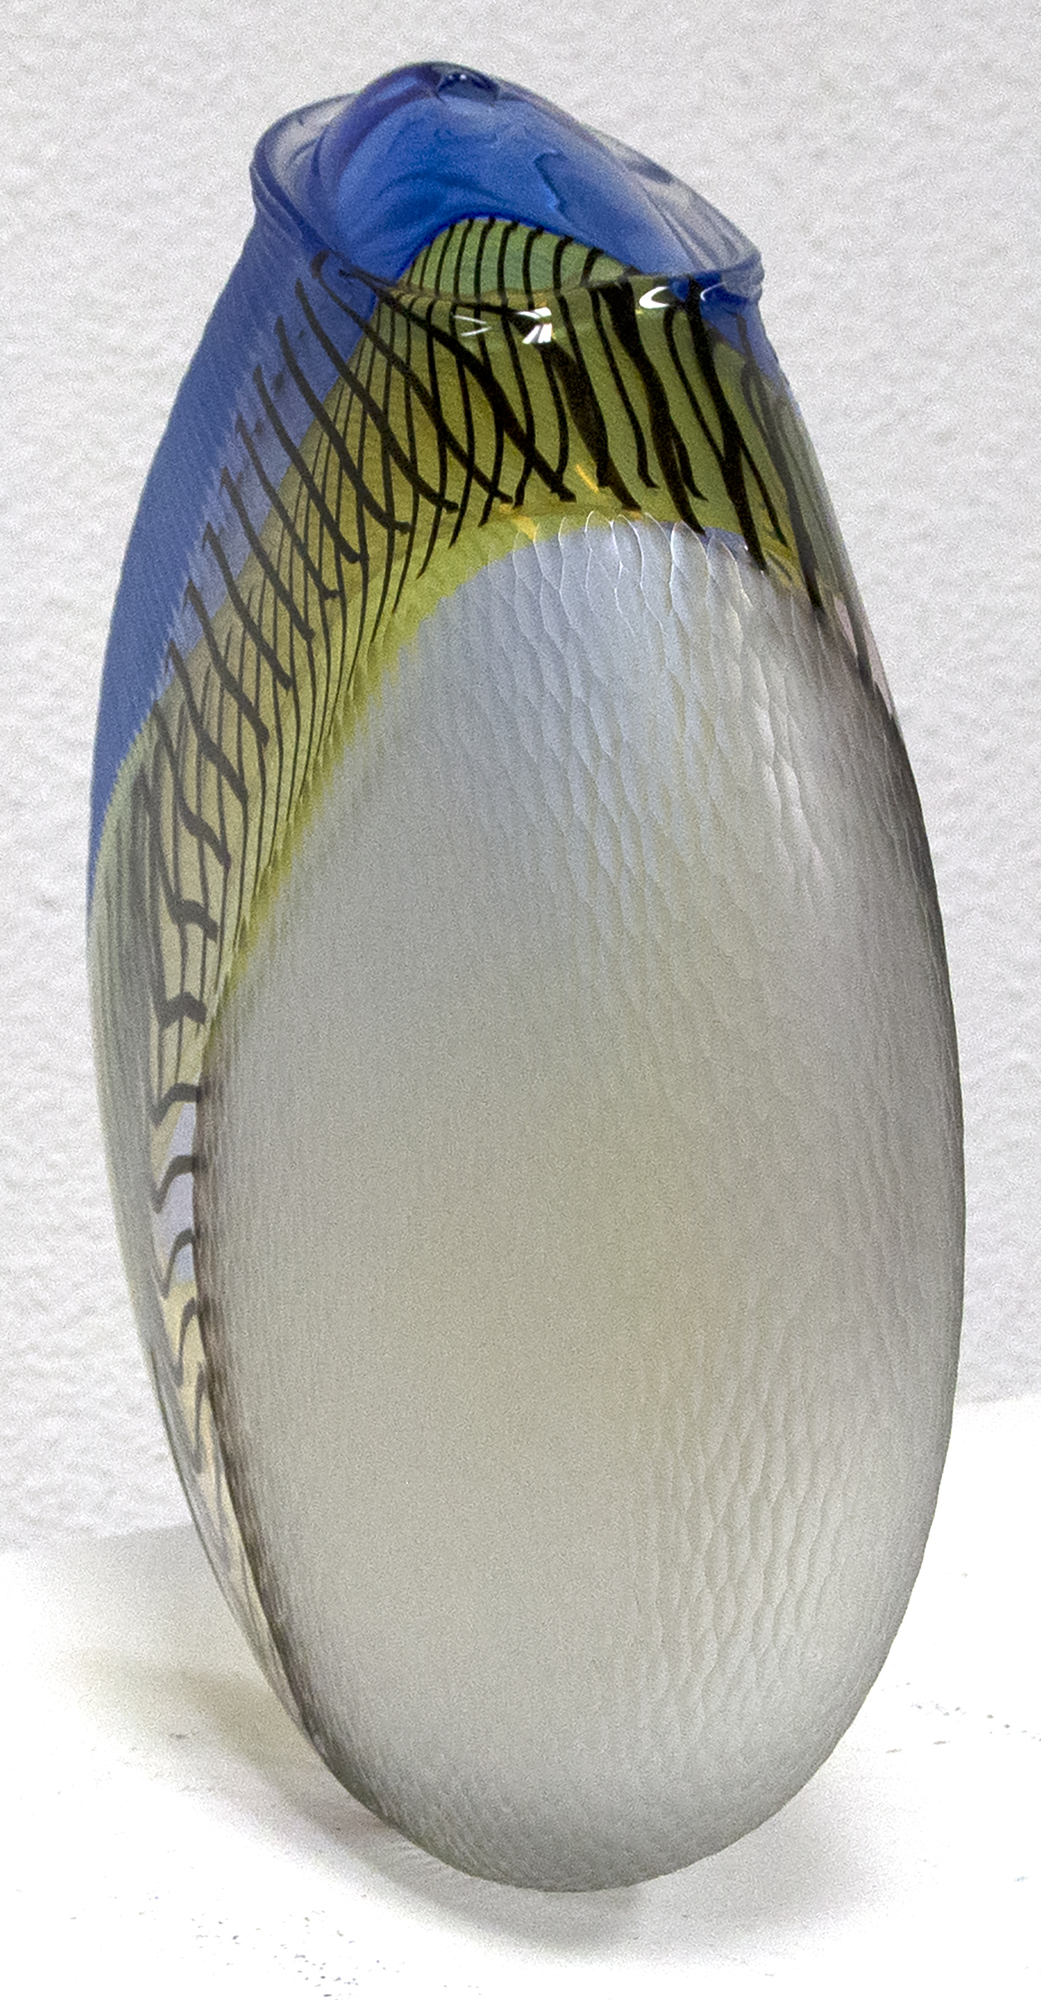 Hand blown glass with multiple incalmo of colored glass and filligrana. Switching the axel of the glass bubble and adjoining two glass bubbles with raticallo technique. Engraved partially on the surface with different patterns.&lt;br&gt;&lt;br&gt;Lino Tagliapietra, a native to Murano, is one of the world&#039;s preeminent glass artists.